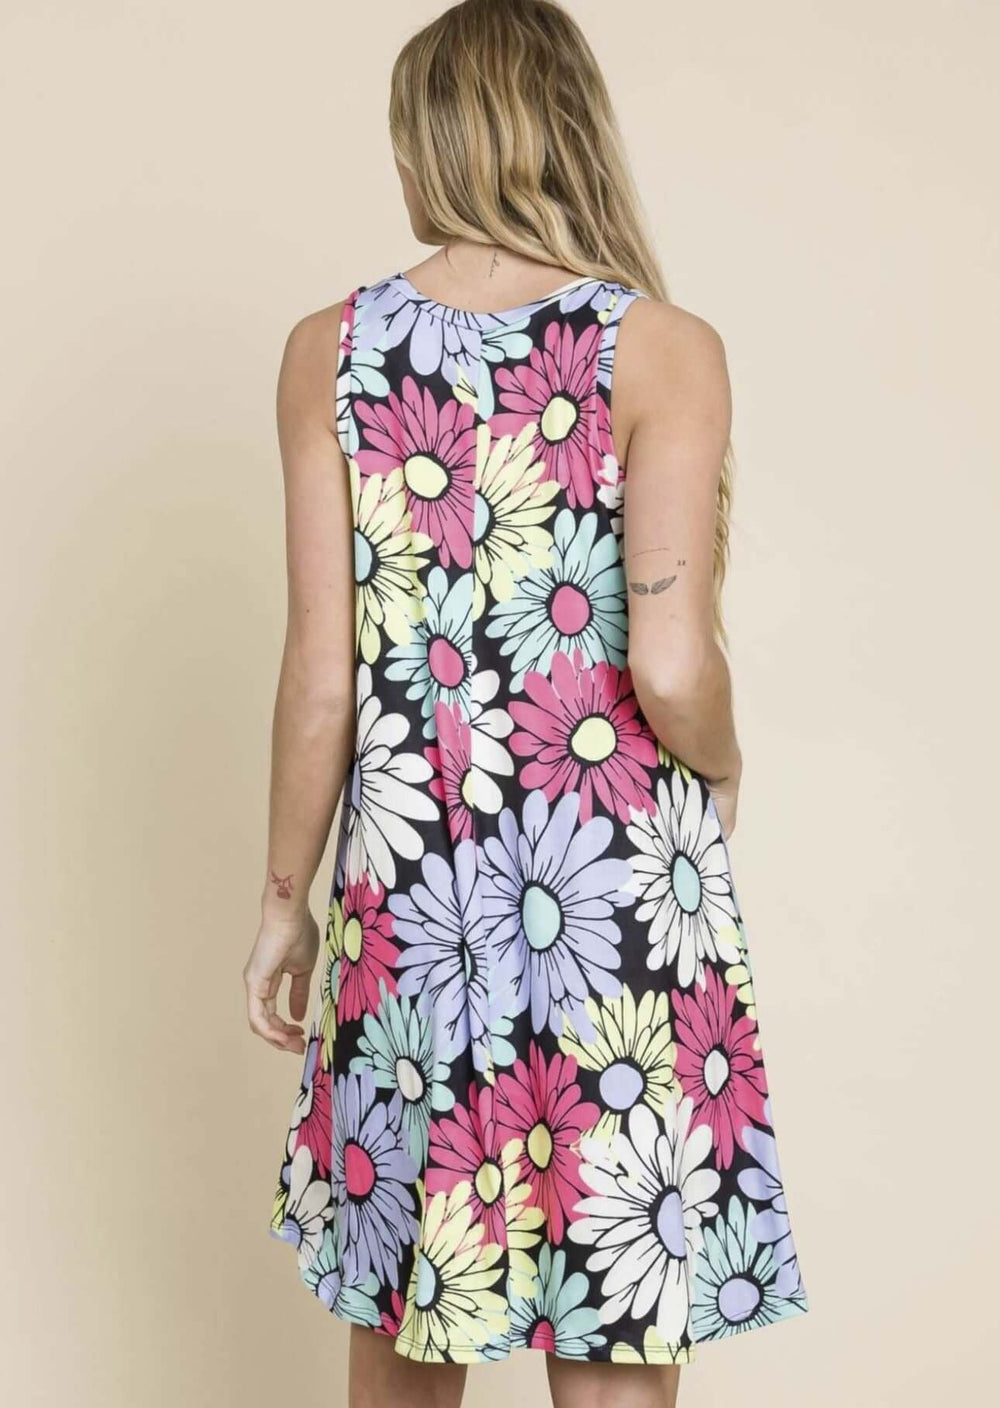 Made in USA Women's Bright Floral Print Mini Dress, Knee Length, Sleeveless, Round Neckline, Super Soft Material, Colorful with Pink, Lavender, White & Aqua